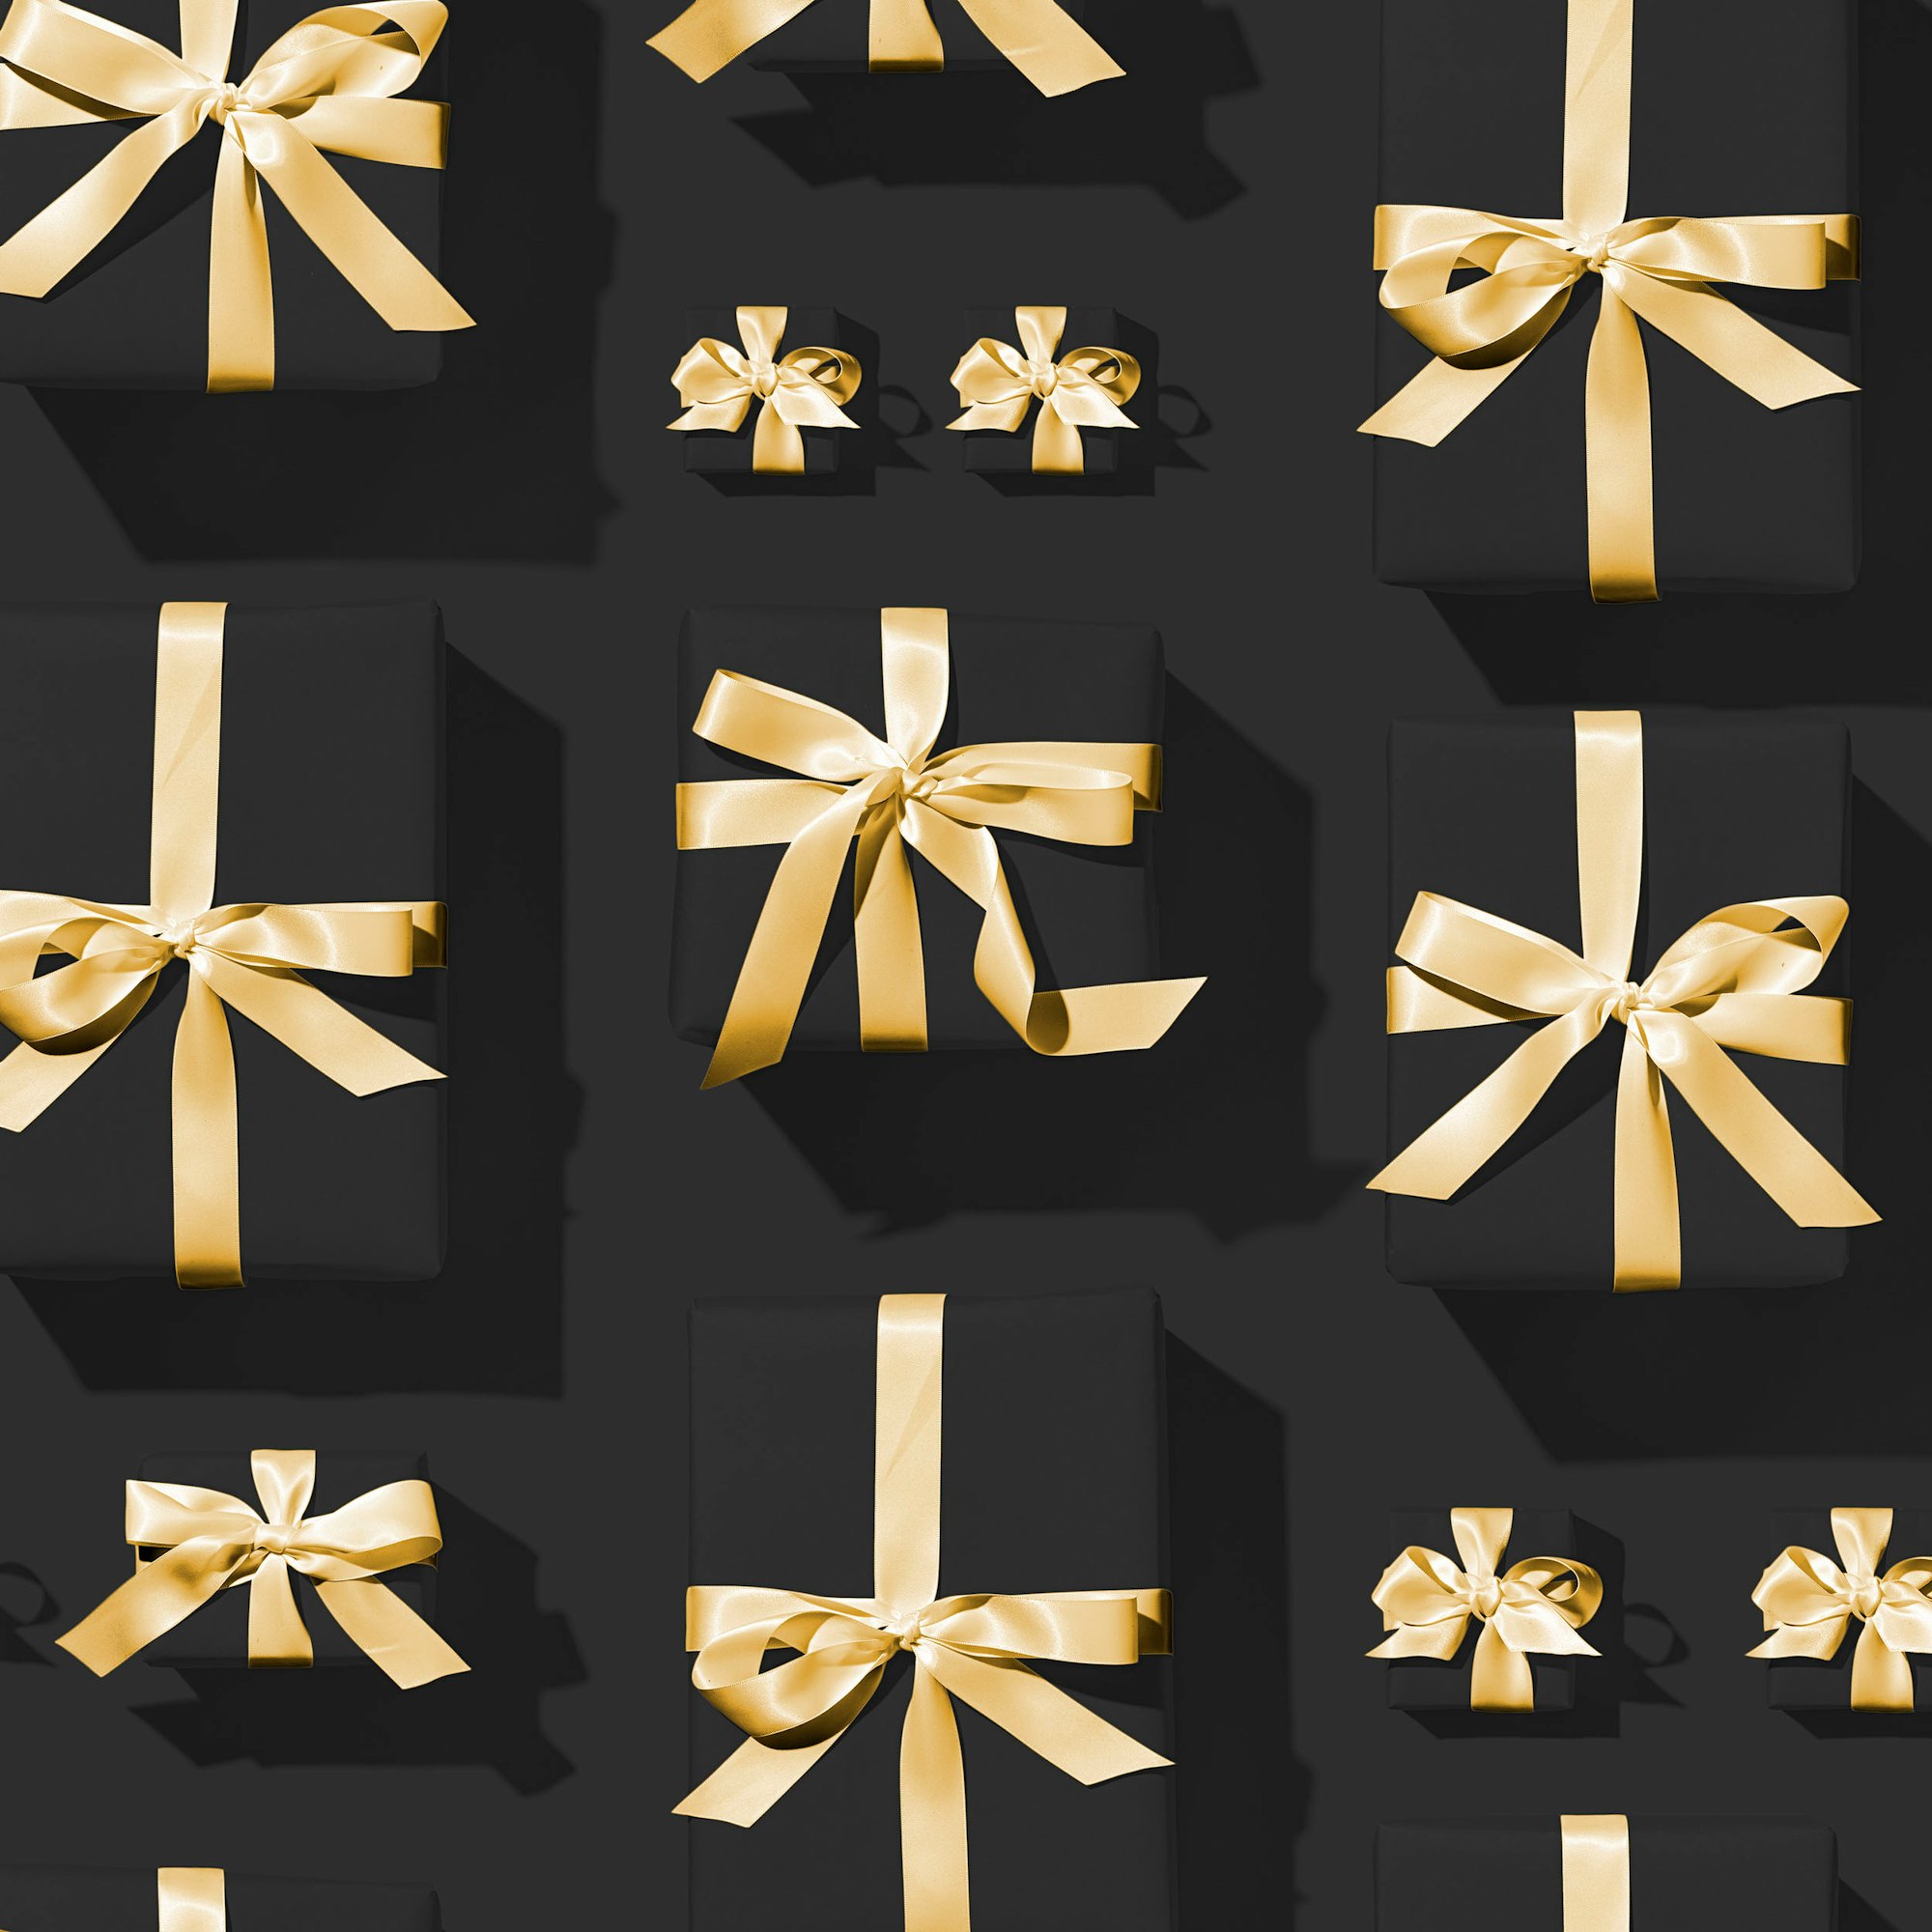 Gift Giving Guide